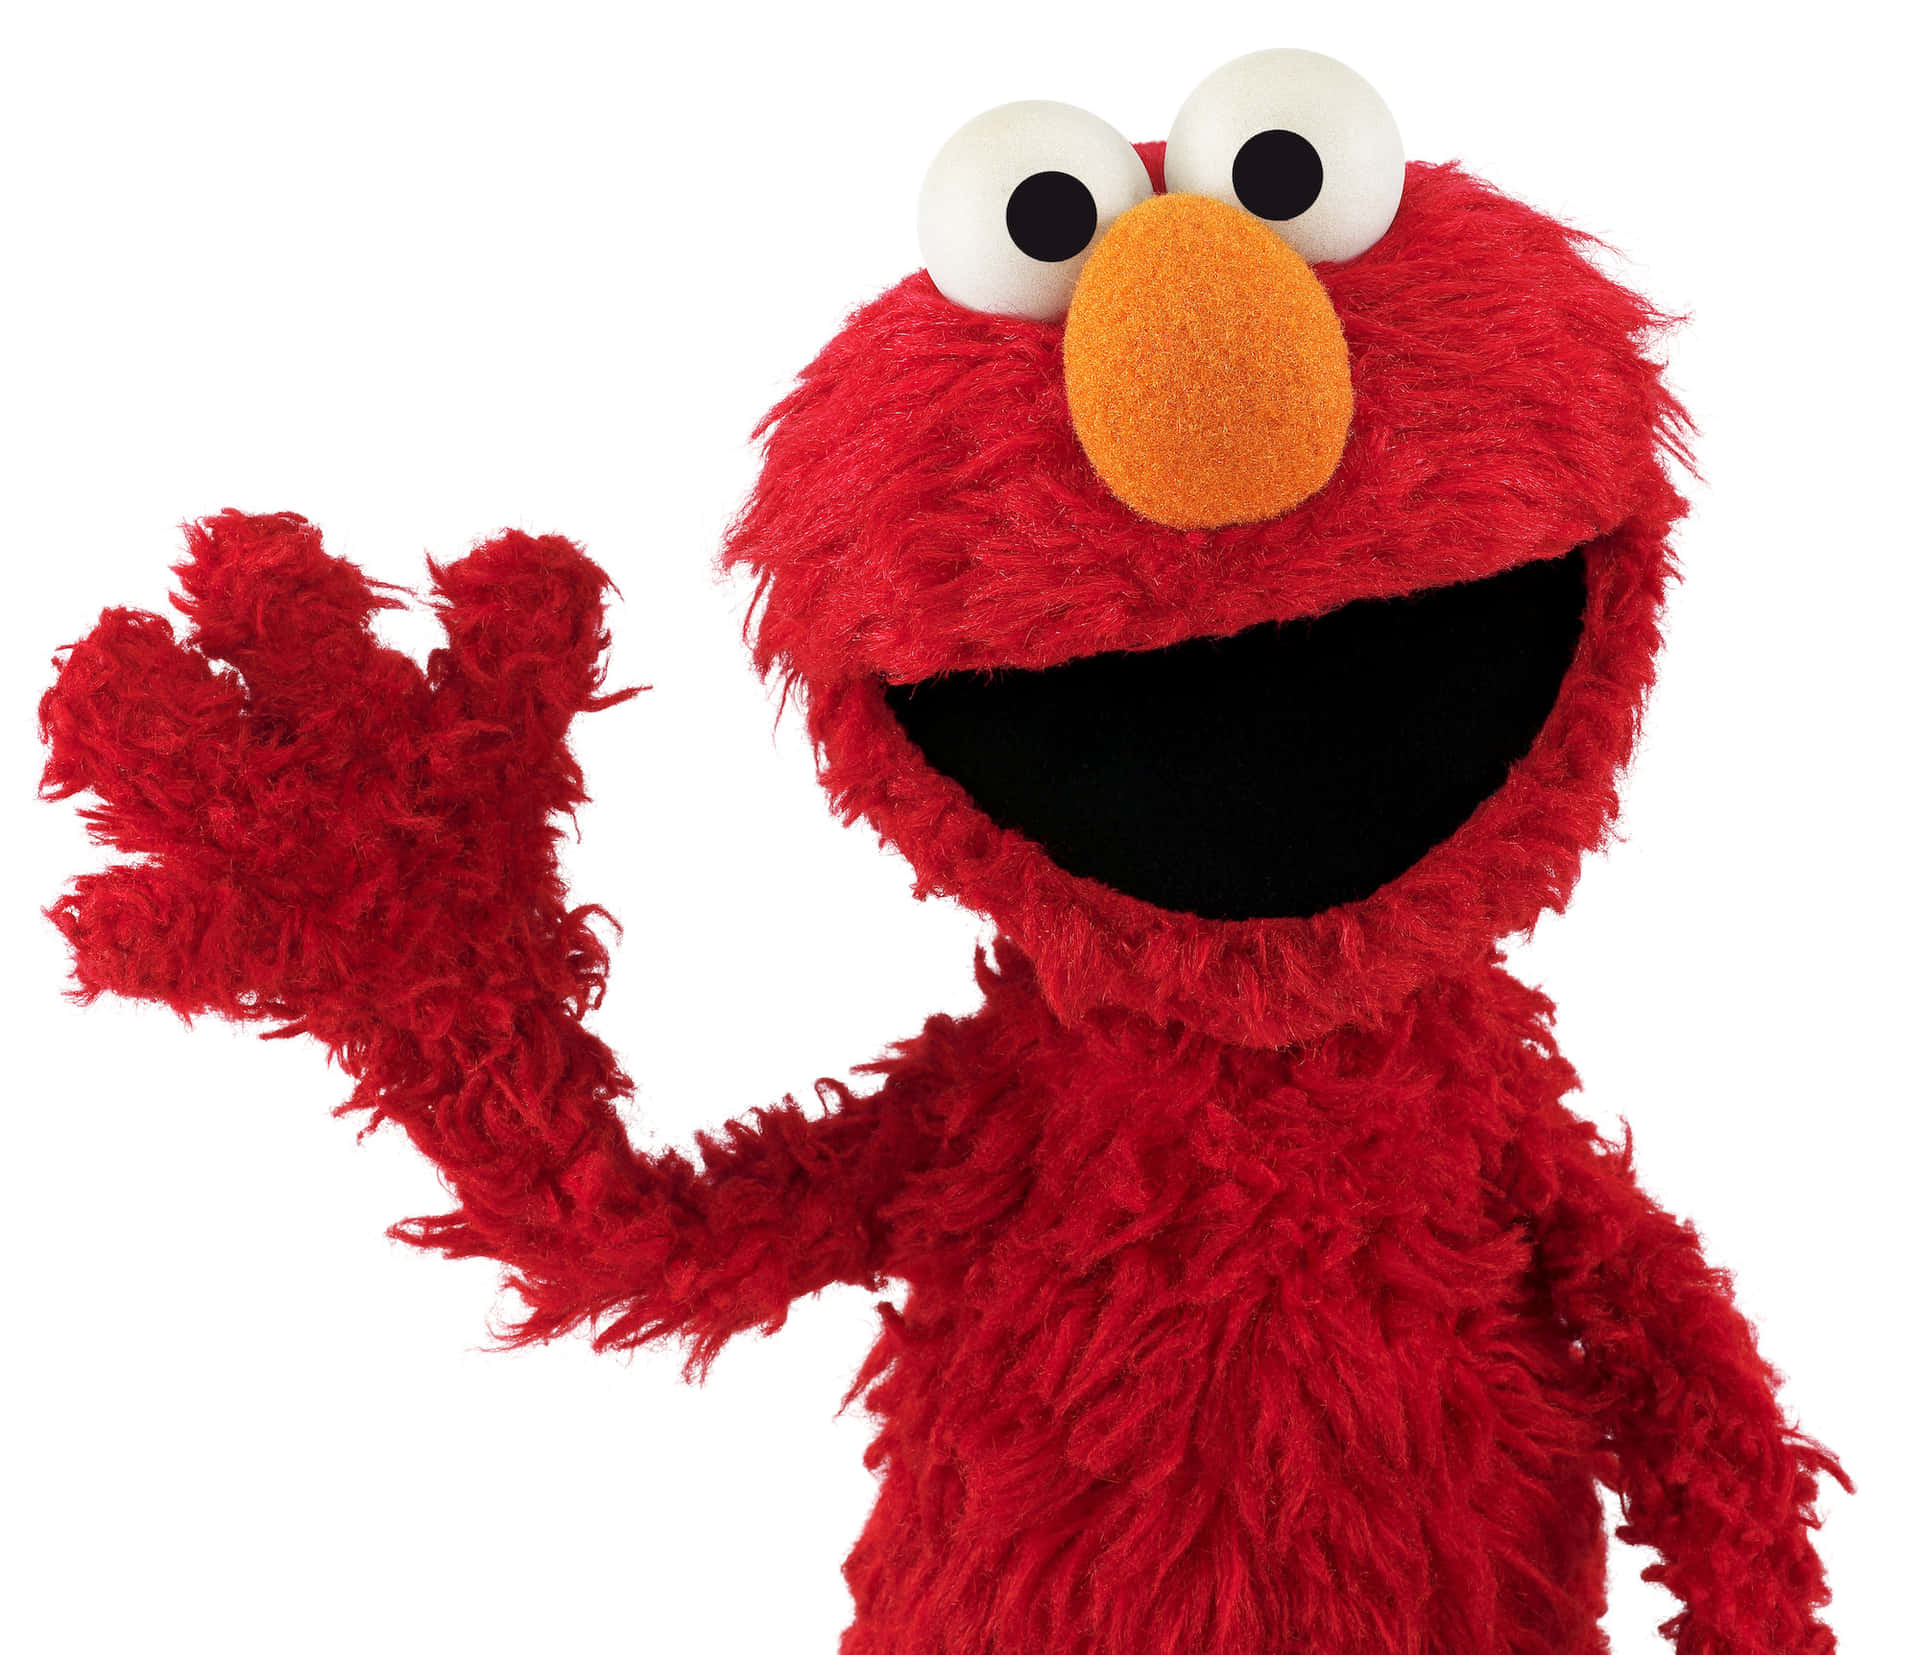 A childhood classic, Elmo is here to brighten your day!